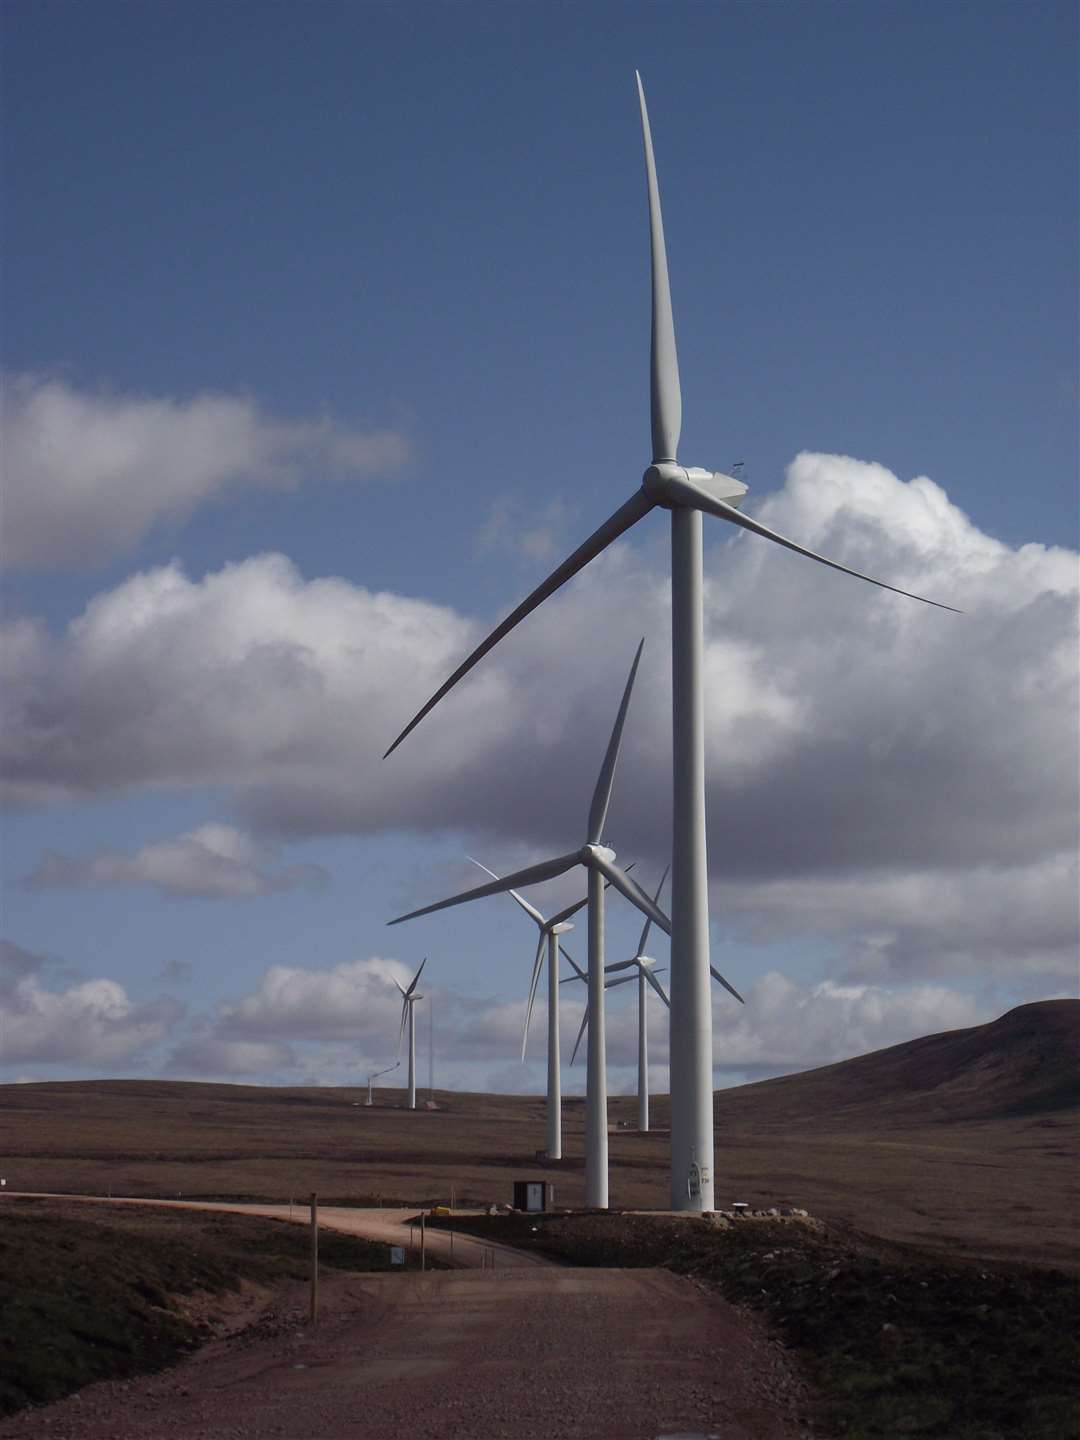 Gordonbush wind farm has received more than £19 million in constraint payments.